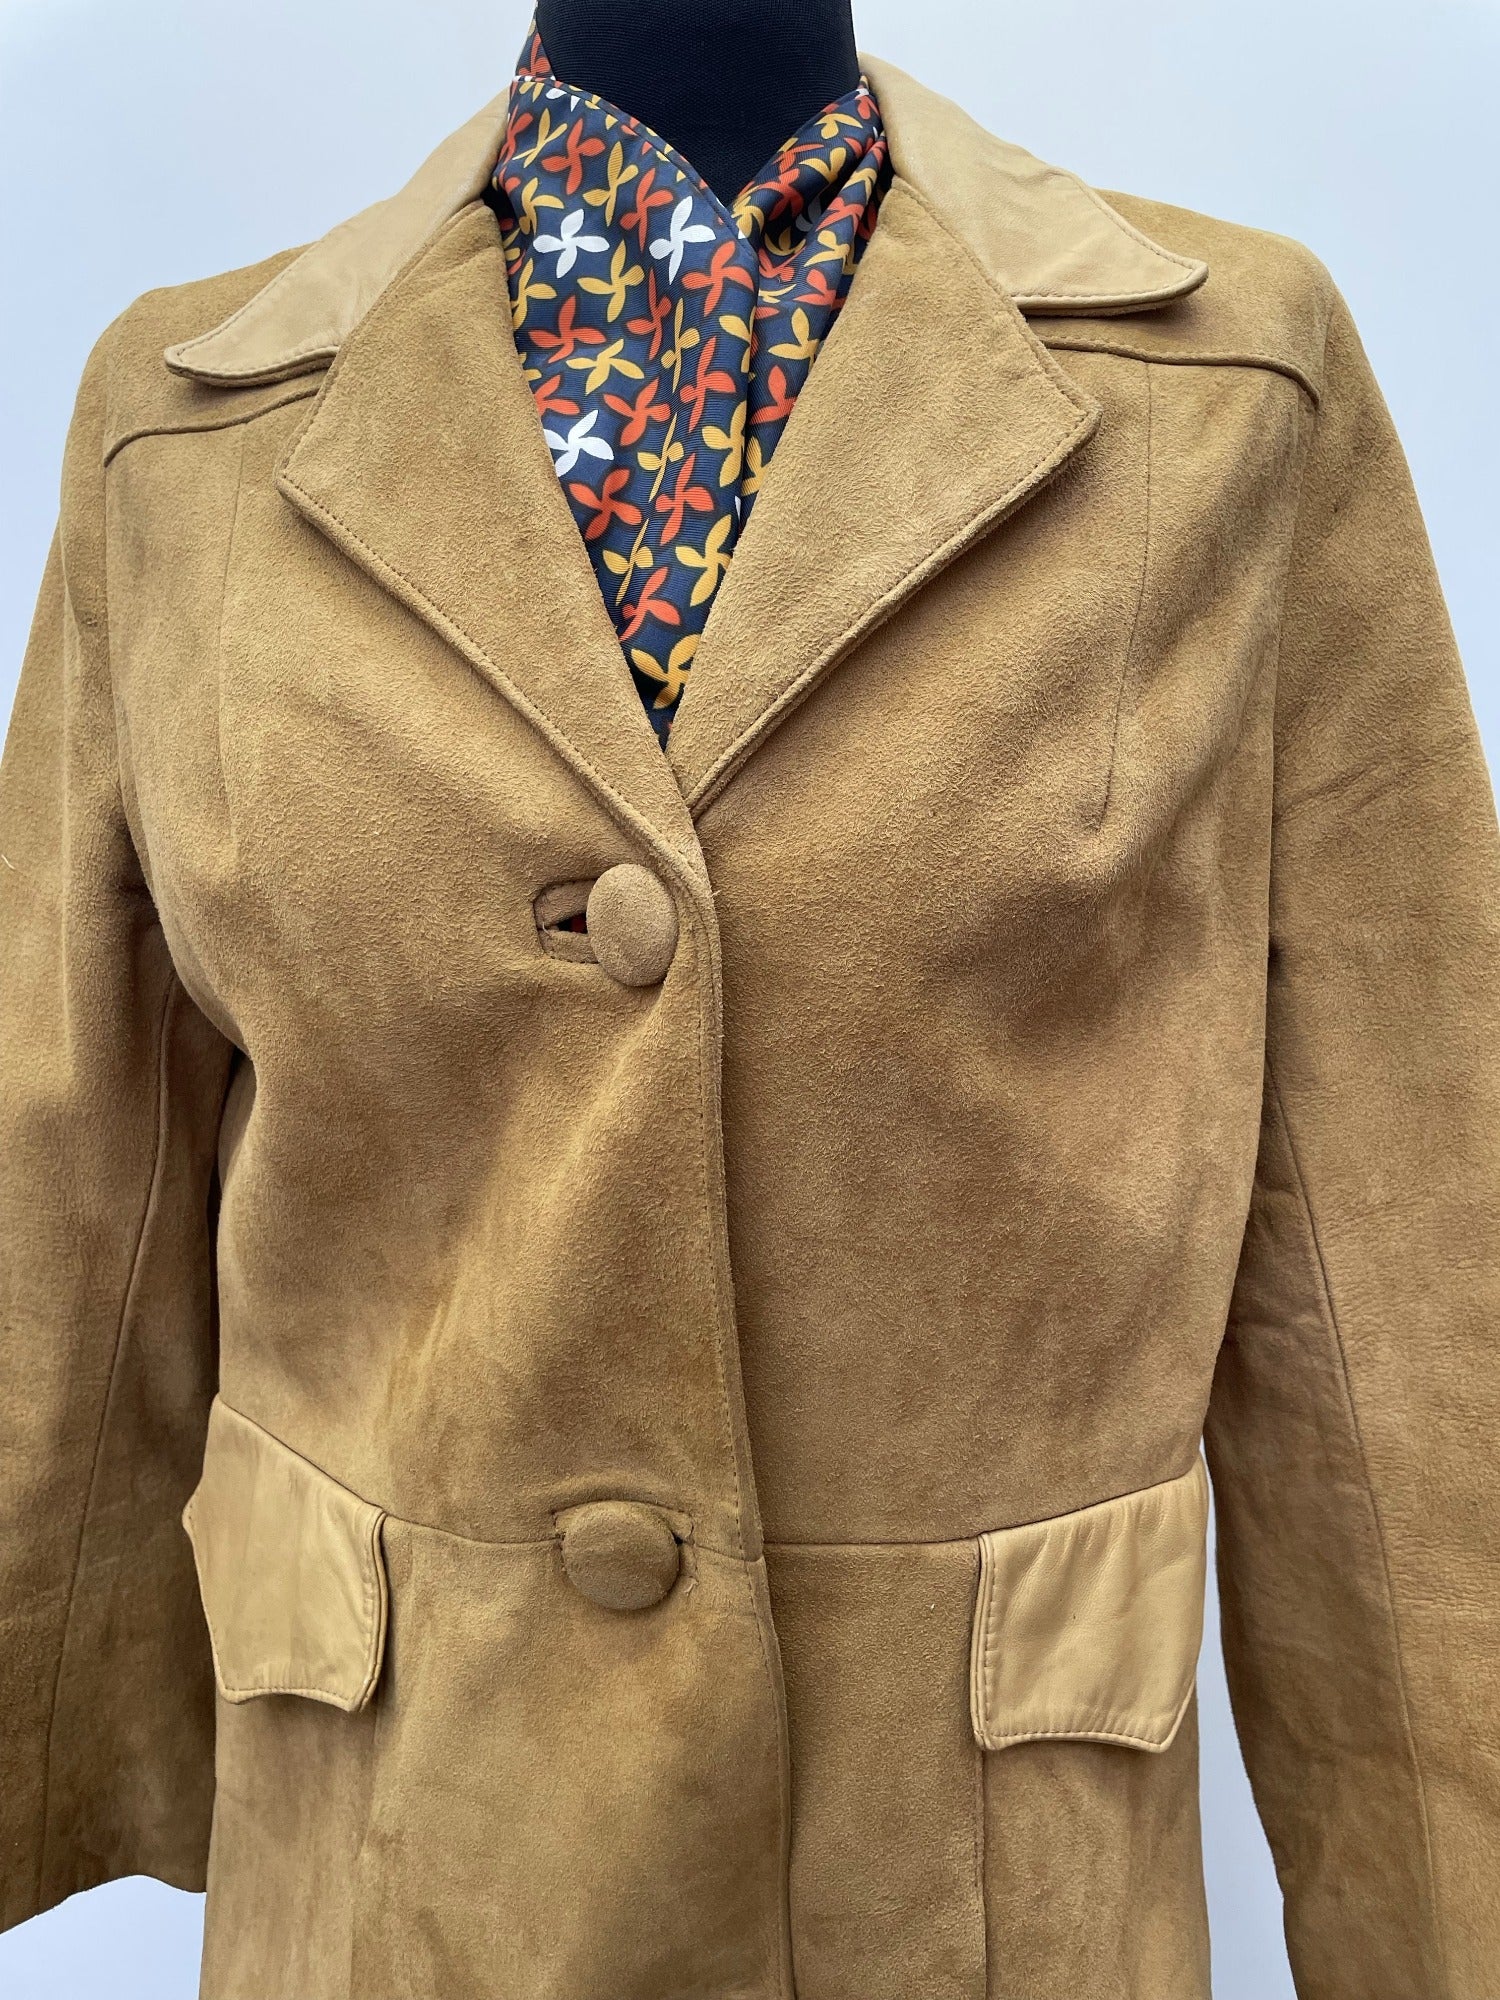 Yellow  womens coat  womens  vintage  Urban Village Vintage  urban village  Suede Jacket  Suede  mustard  midi  long sleeve  leather trim  Leather Coat  Leather  lapels  coat  brown  60s  1960s  12  10/12  10